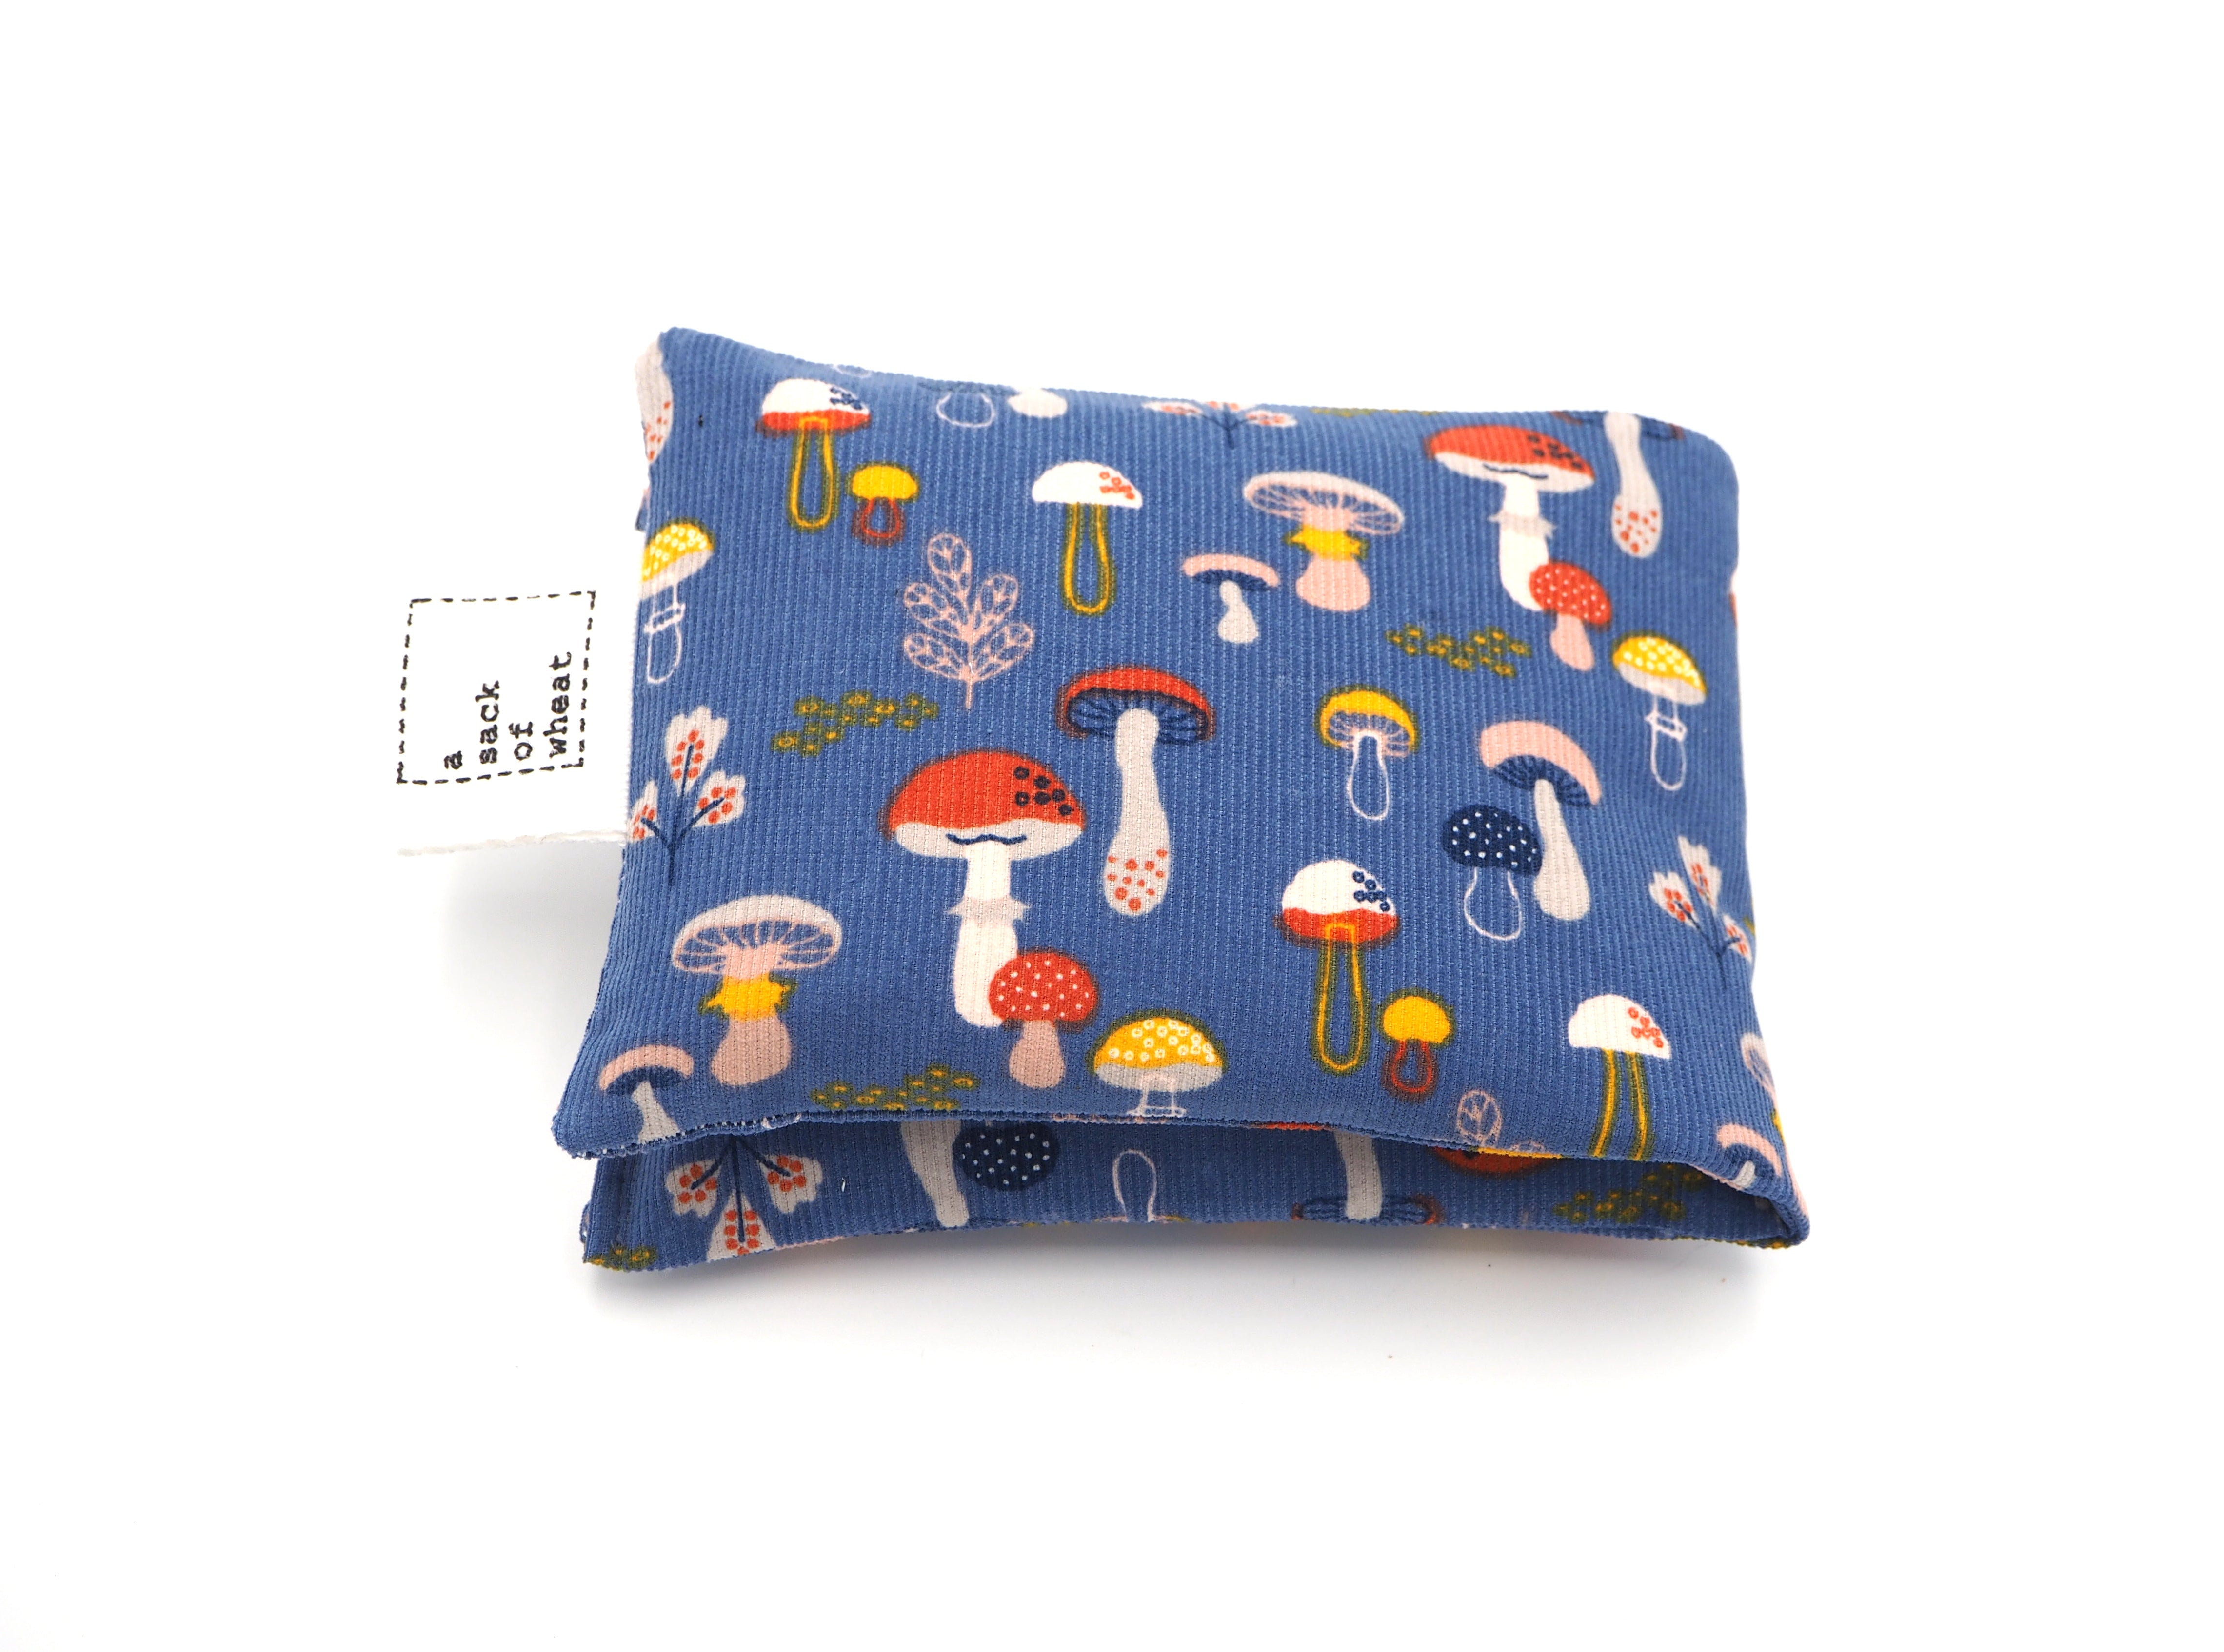 Folded view of A Sack Of Wheat, featuring cute, colorful mushrooms on blue corduroy 100% cotton fabric